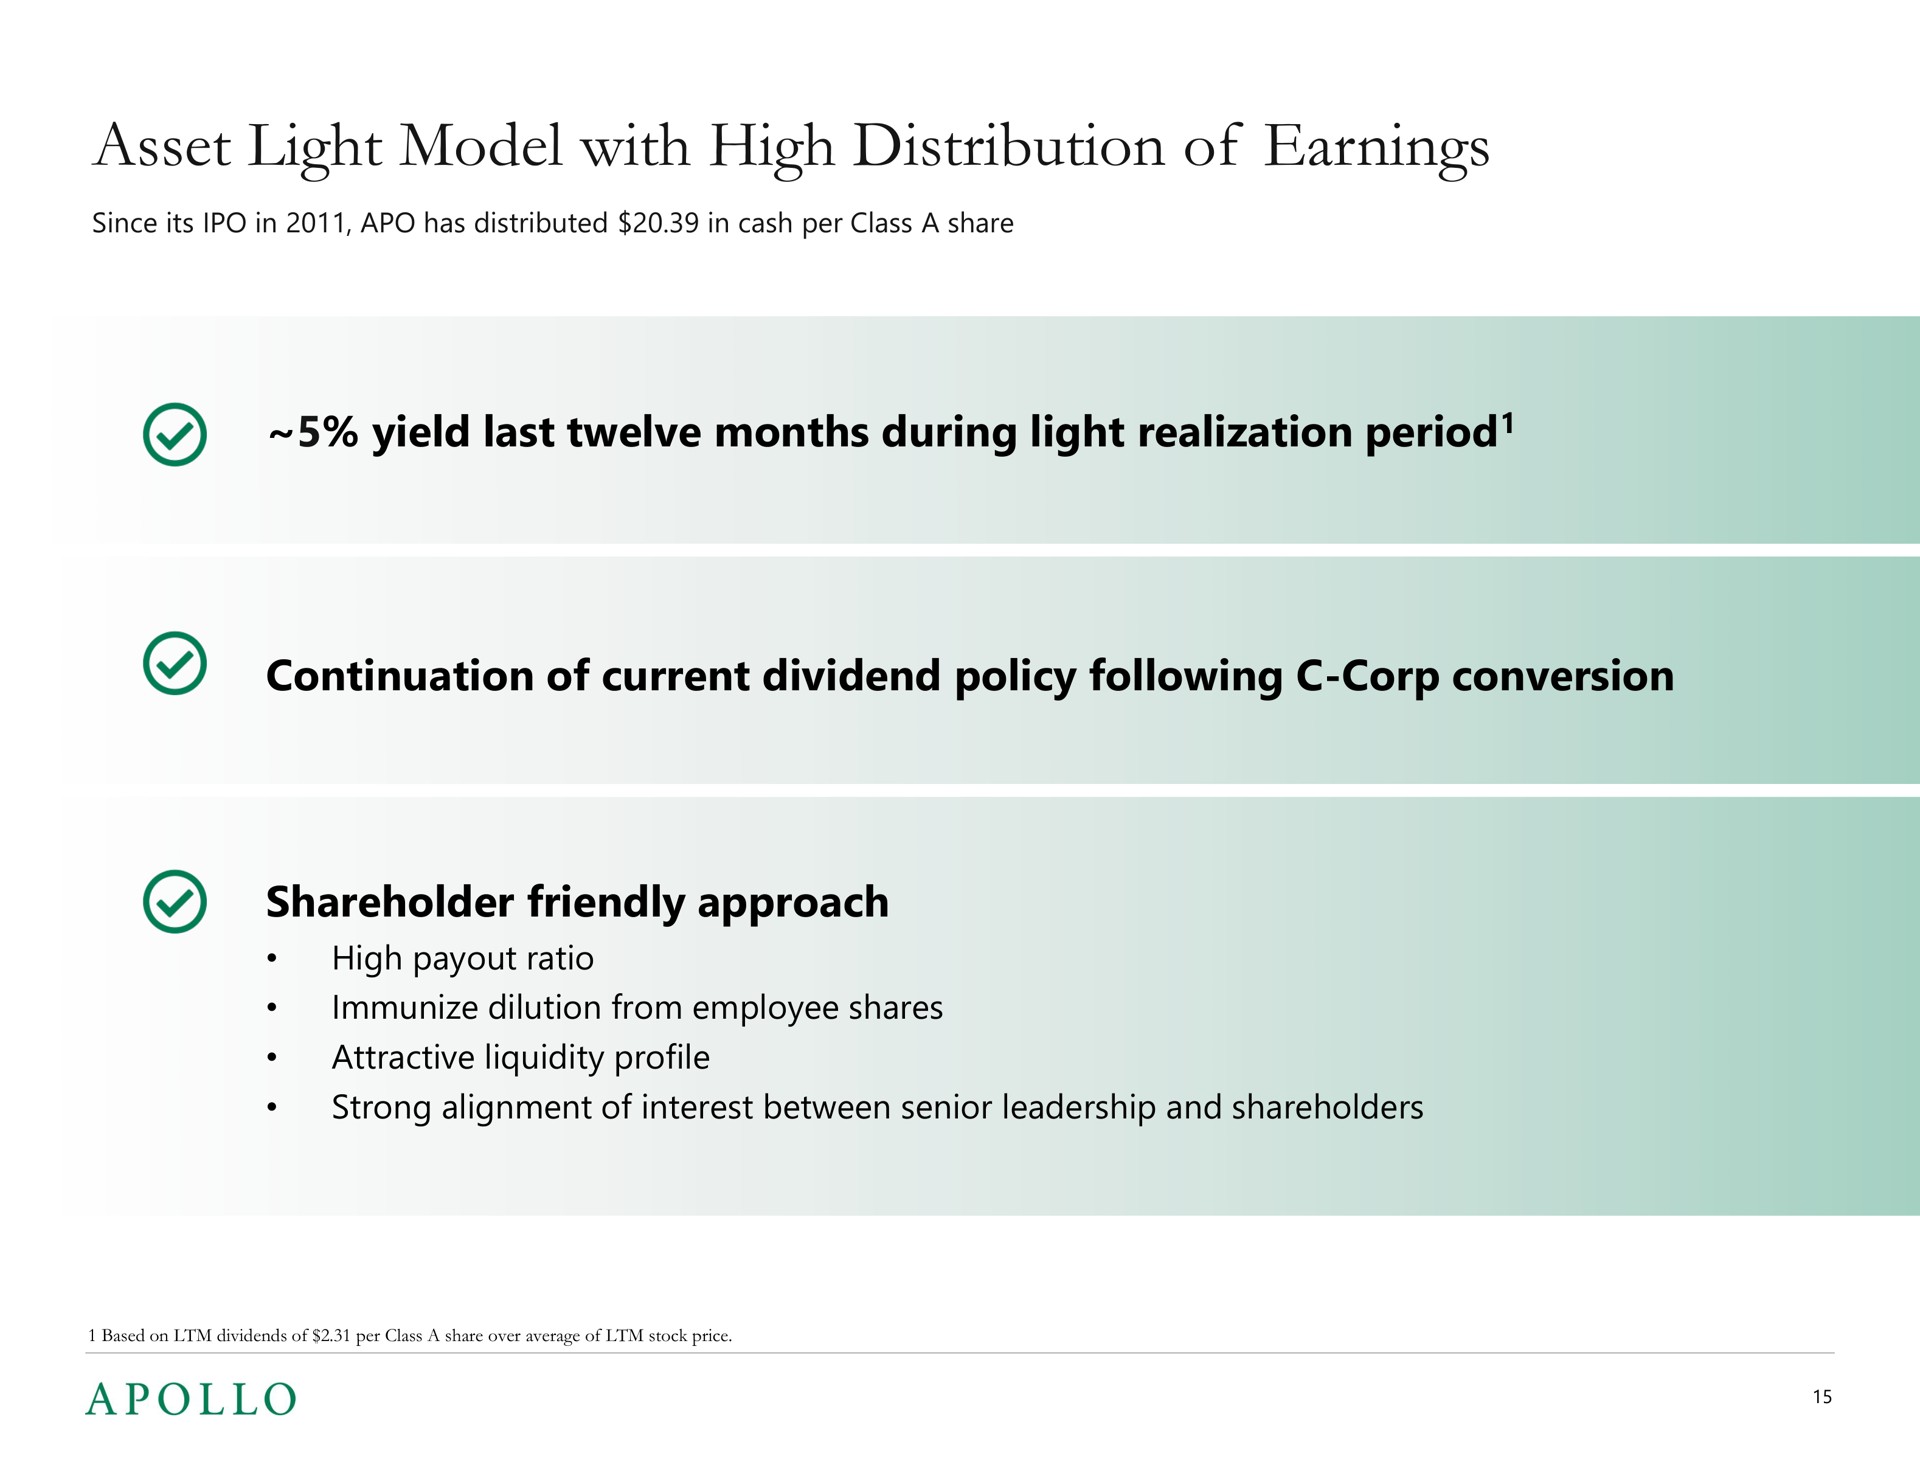 asset light model with high distribution of earnings yield last twelve months during light realization period continuation of current dividend policy following corp conversion shareholder friendly approach period ratio strong alignment interest between senior leadership and shareholders immunize dilution from employee shares attractive liquidity profile i | Apollo Global Management